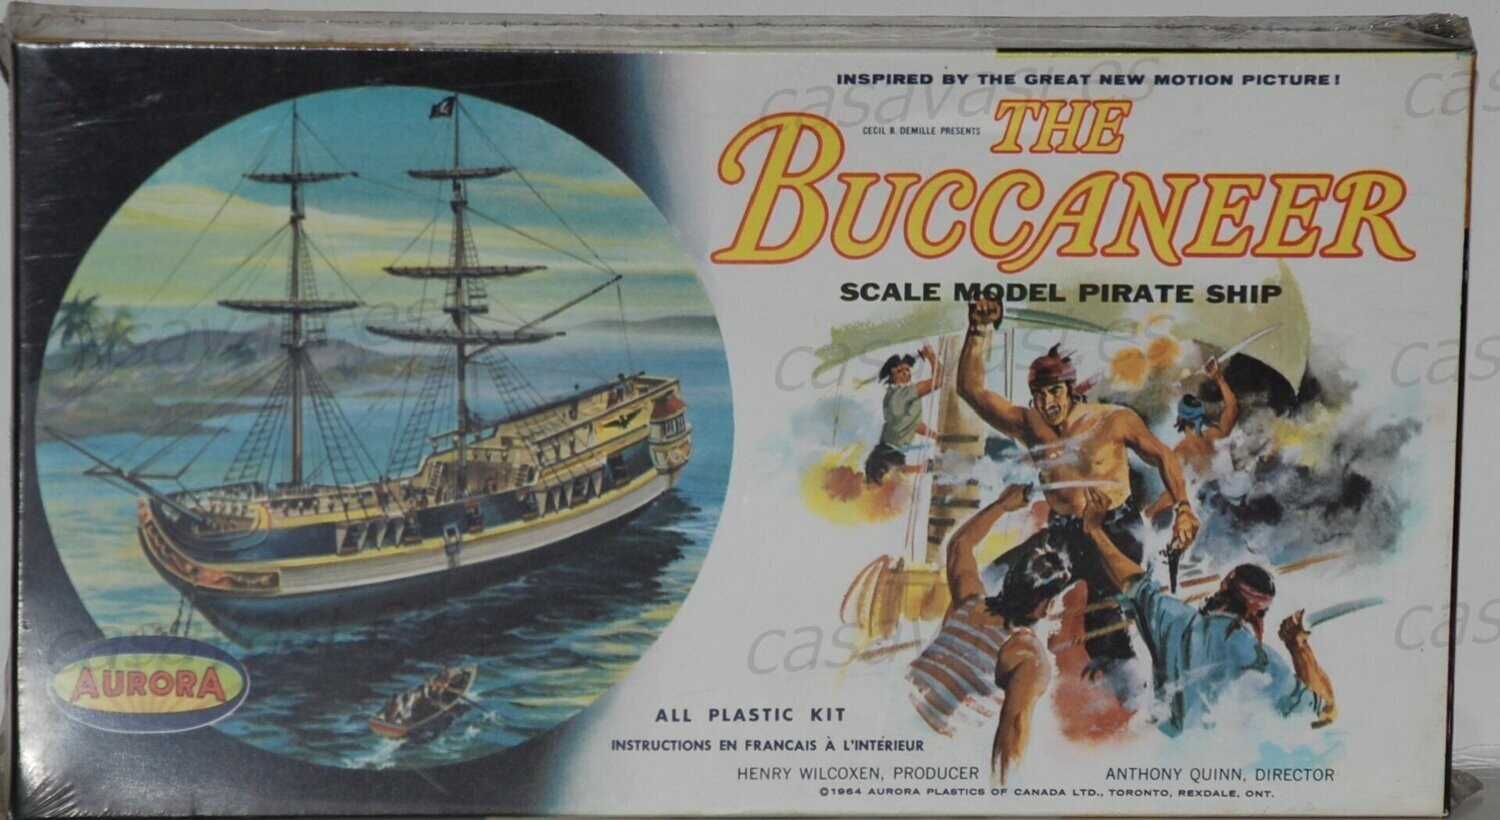 Aurora - 1964 - KIT.NO.429-259 - Made in Canada - The Buccaneer
Box Size 33 x 18 cm.